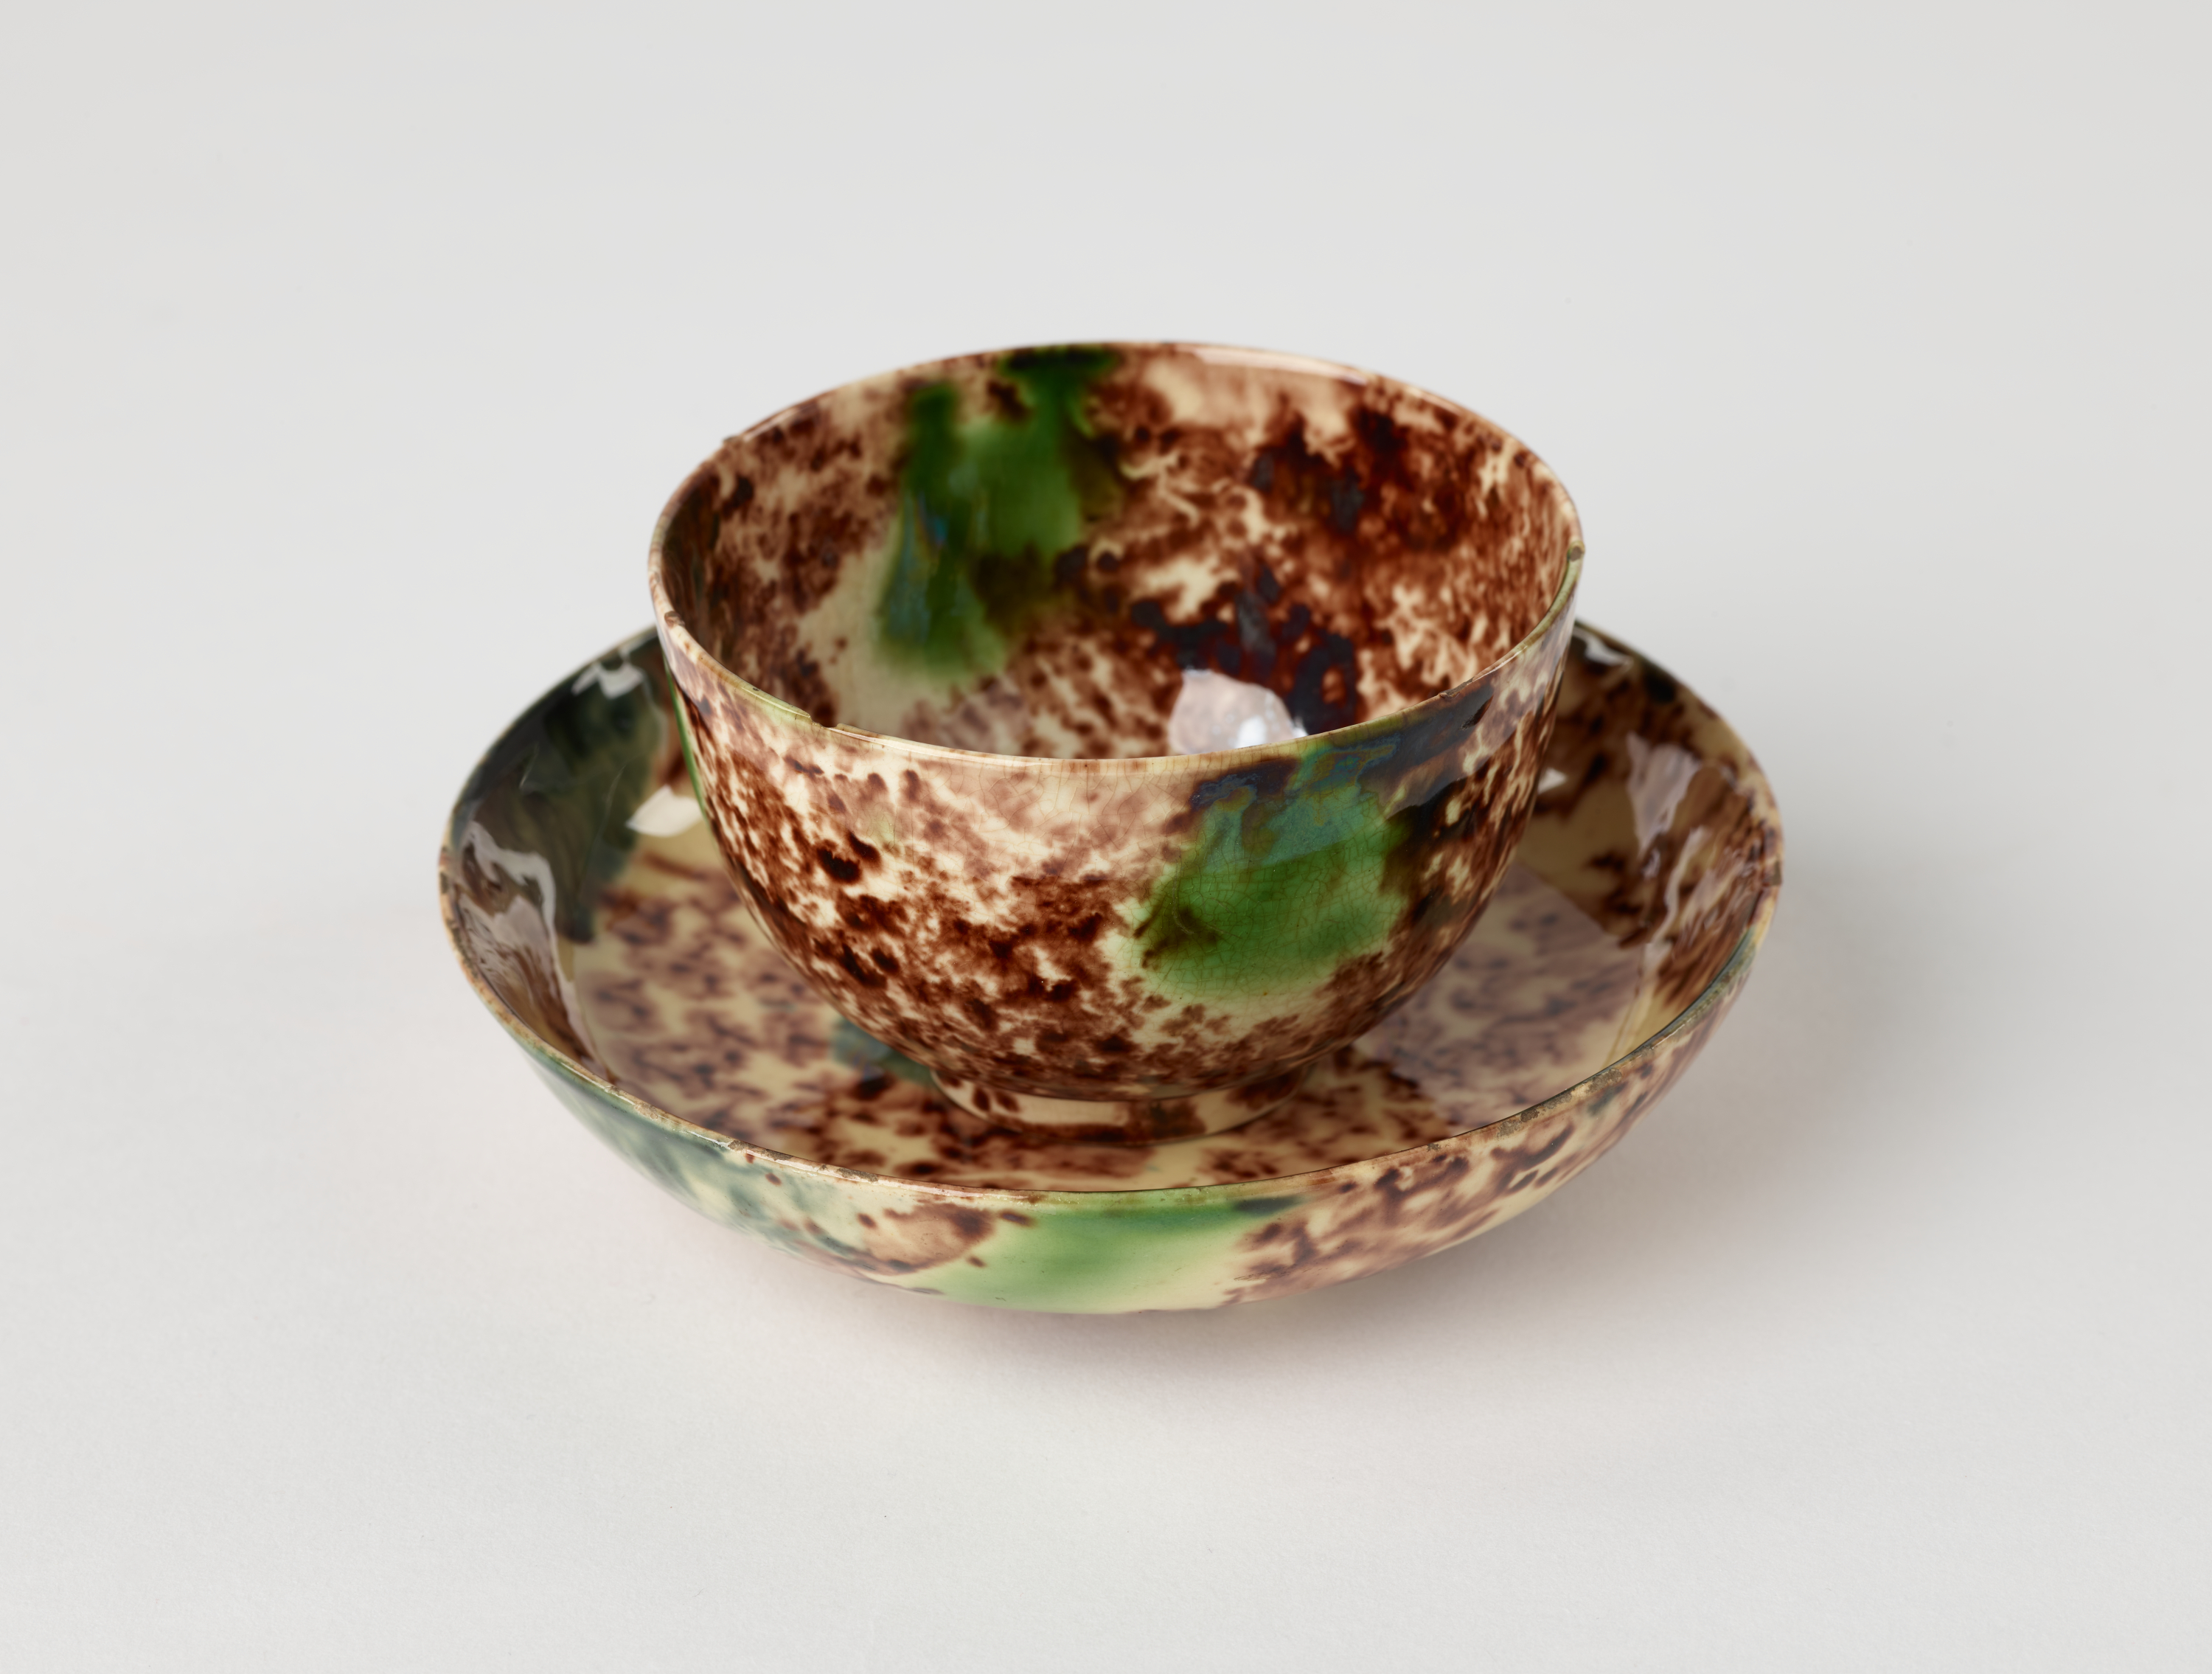 /A%20ceramic%20cup%20and%20saucer%20that%20is%20white%2C%20brown%2C%20and%20green%20in%20color.%20